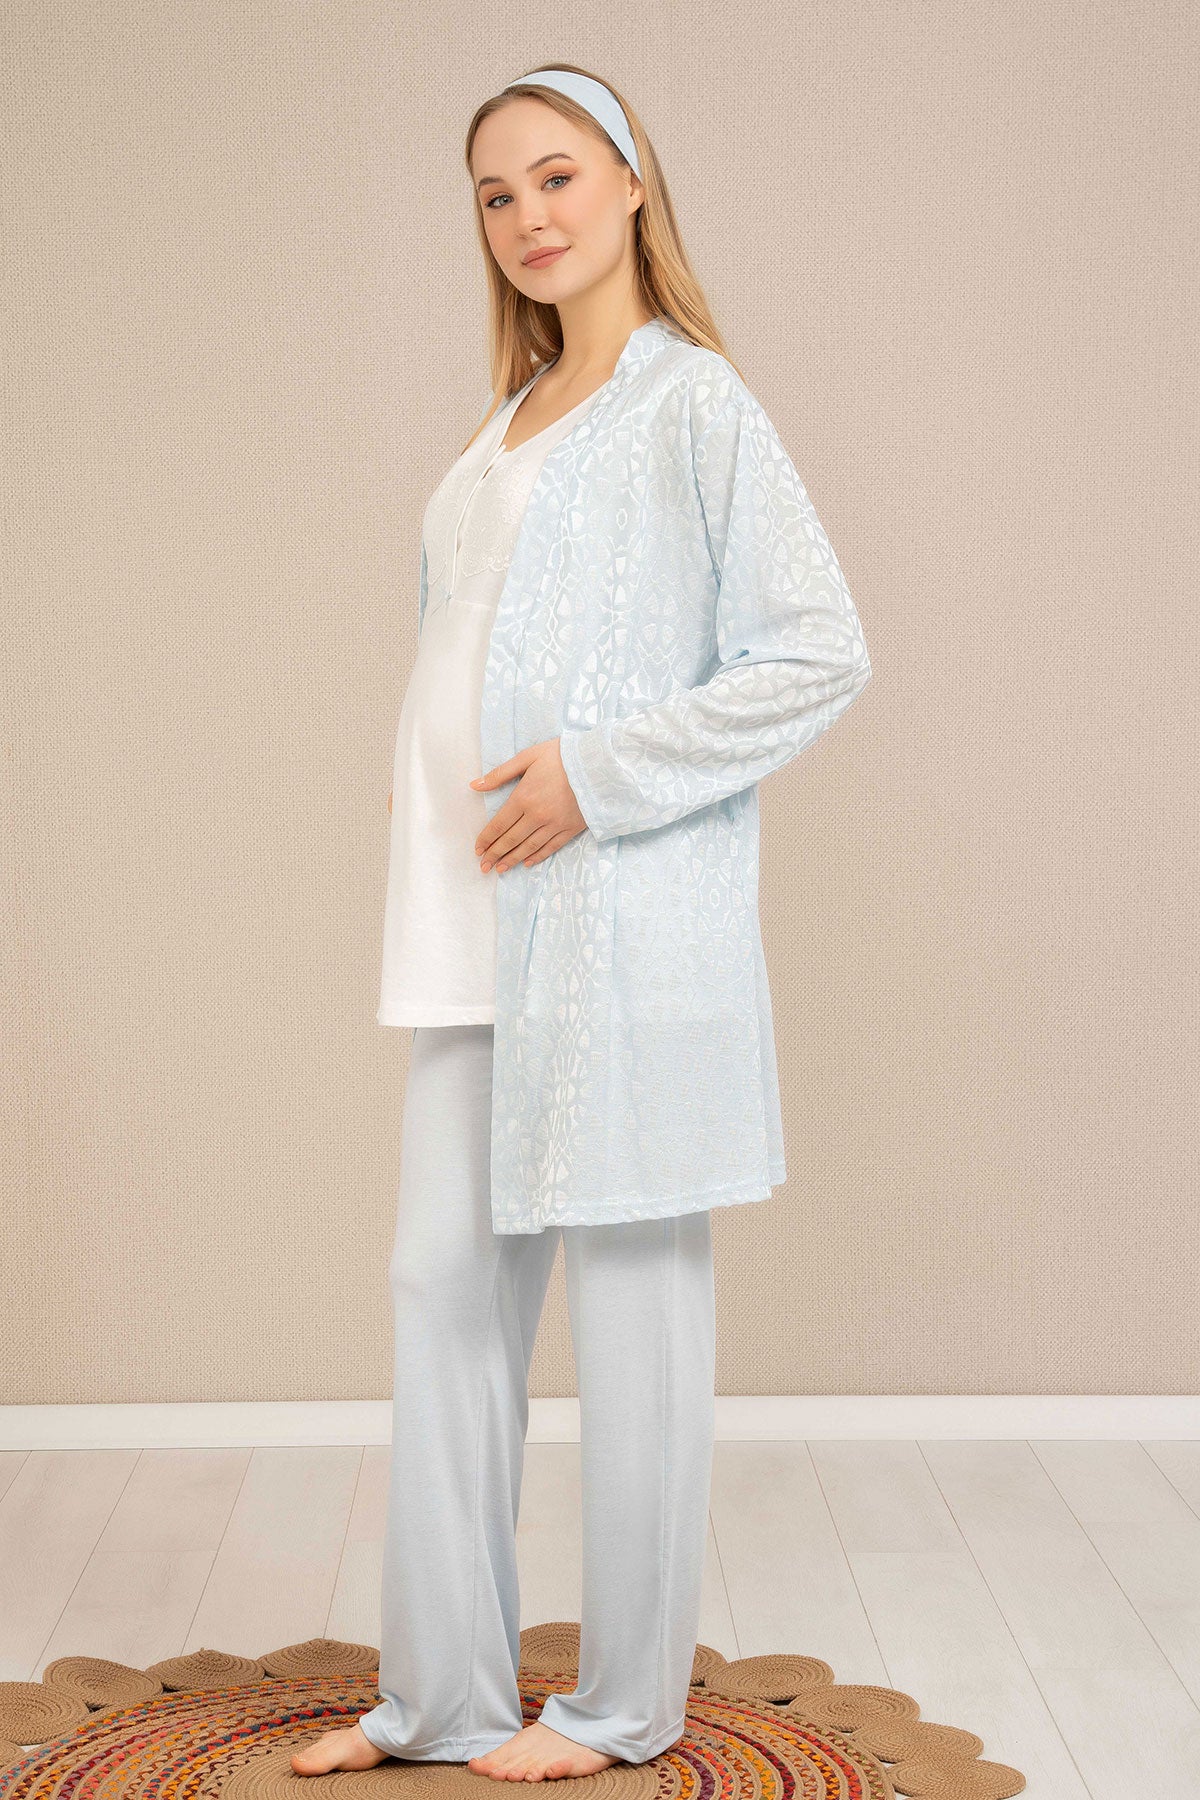 Lace 3-Pieces Maternity & Nursing Pajamas With Patterned Robe Blue - 4509